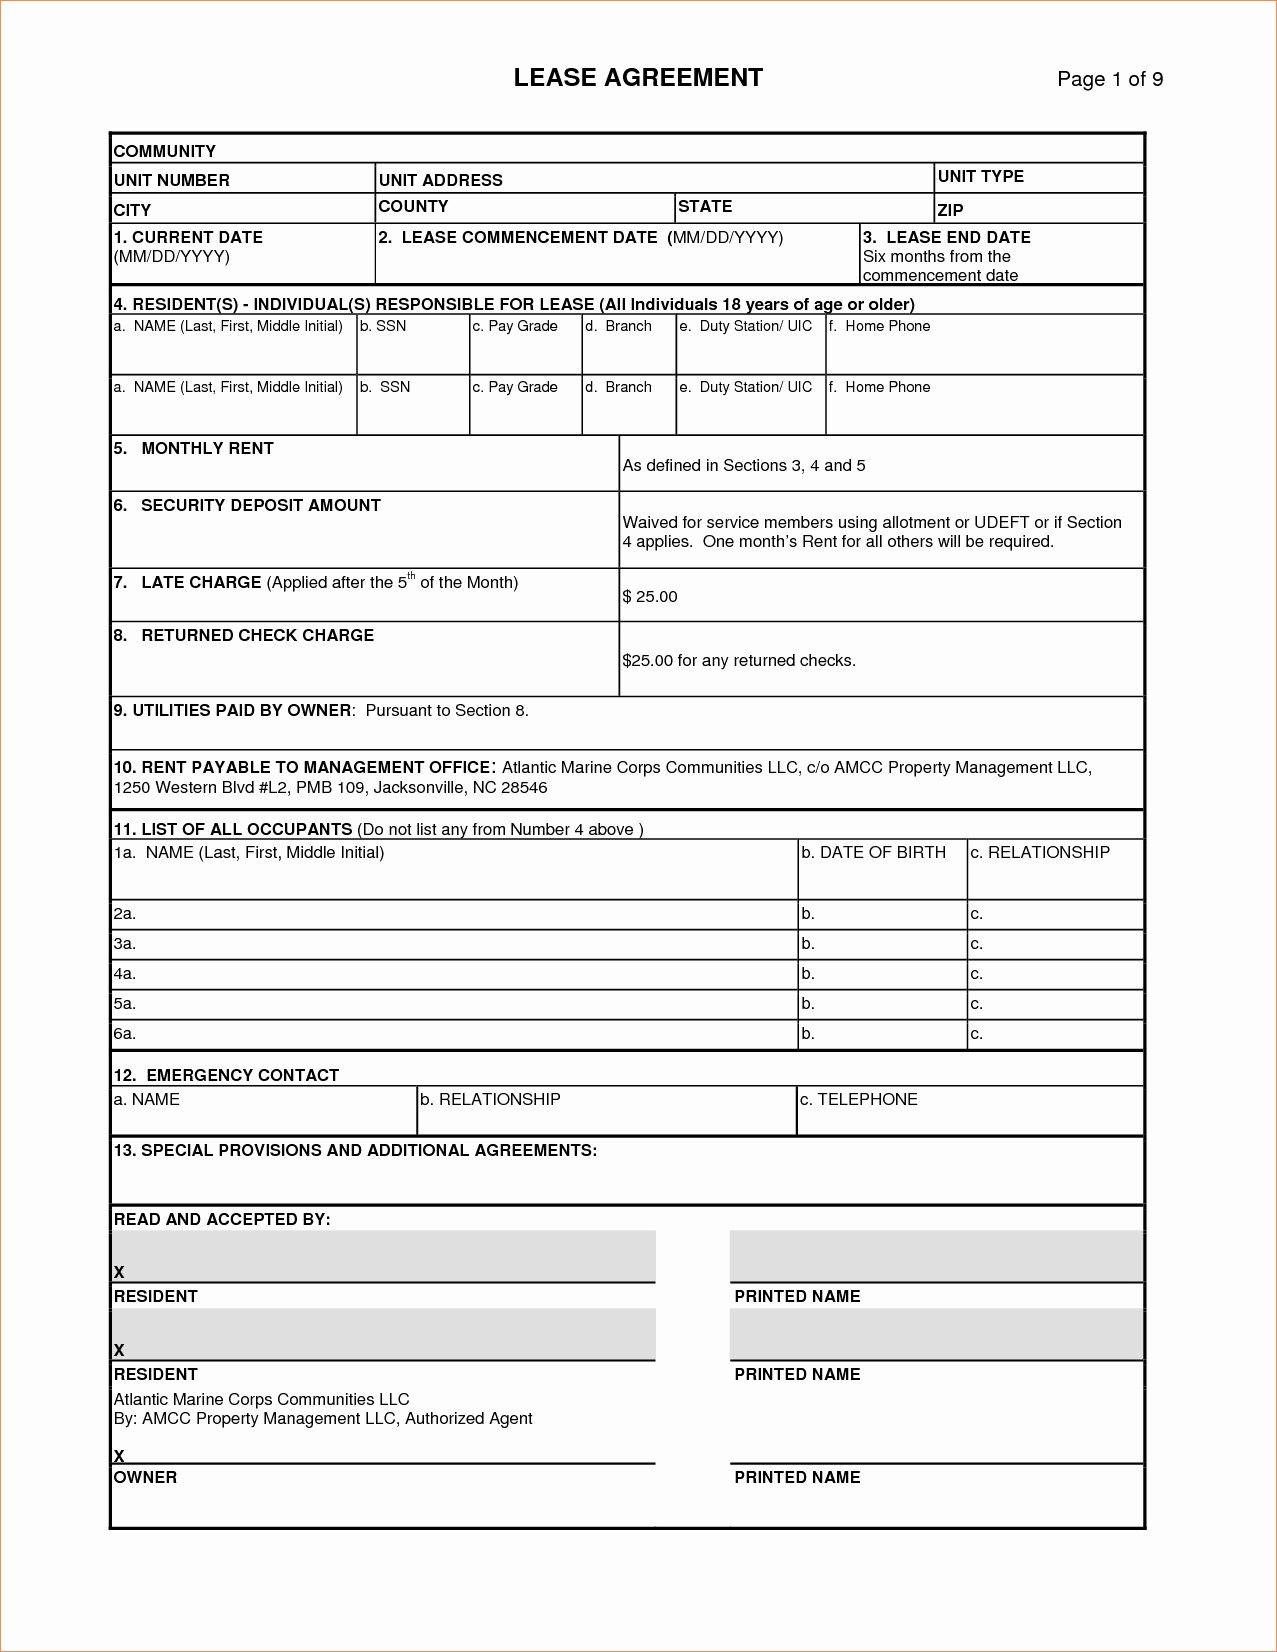 One Page Lease Agreement Lovely 37 New Simple E Page Lease Agreement Qe V